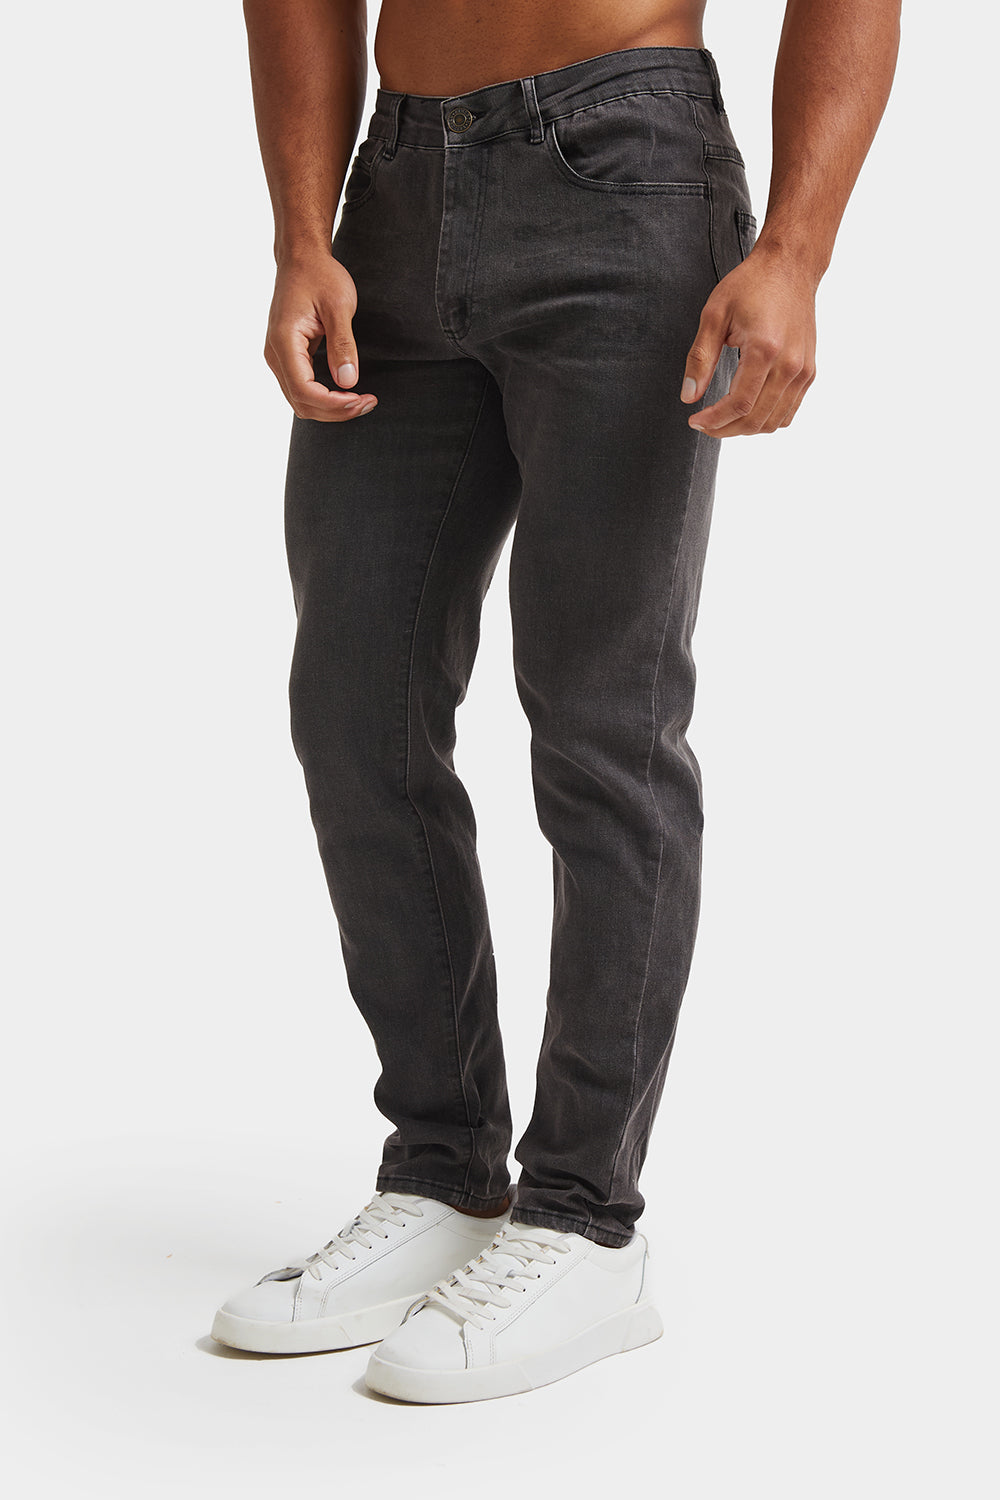 Athletic Fit - Dark TAILORED in - USA ATHLETE Jeans Grey